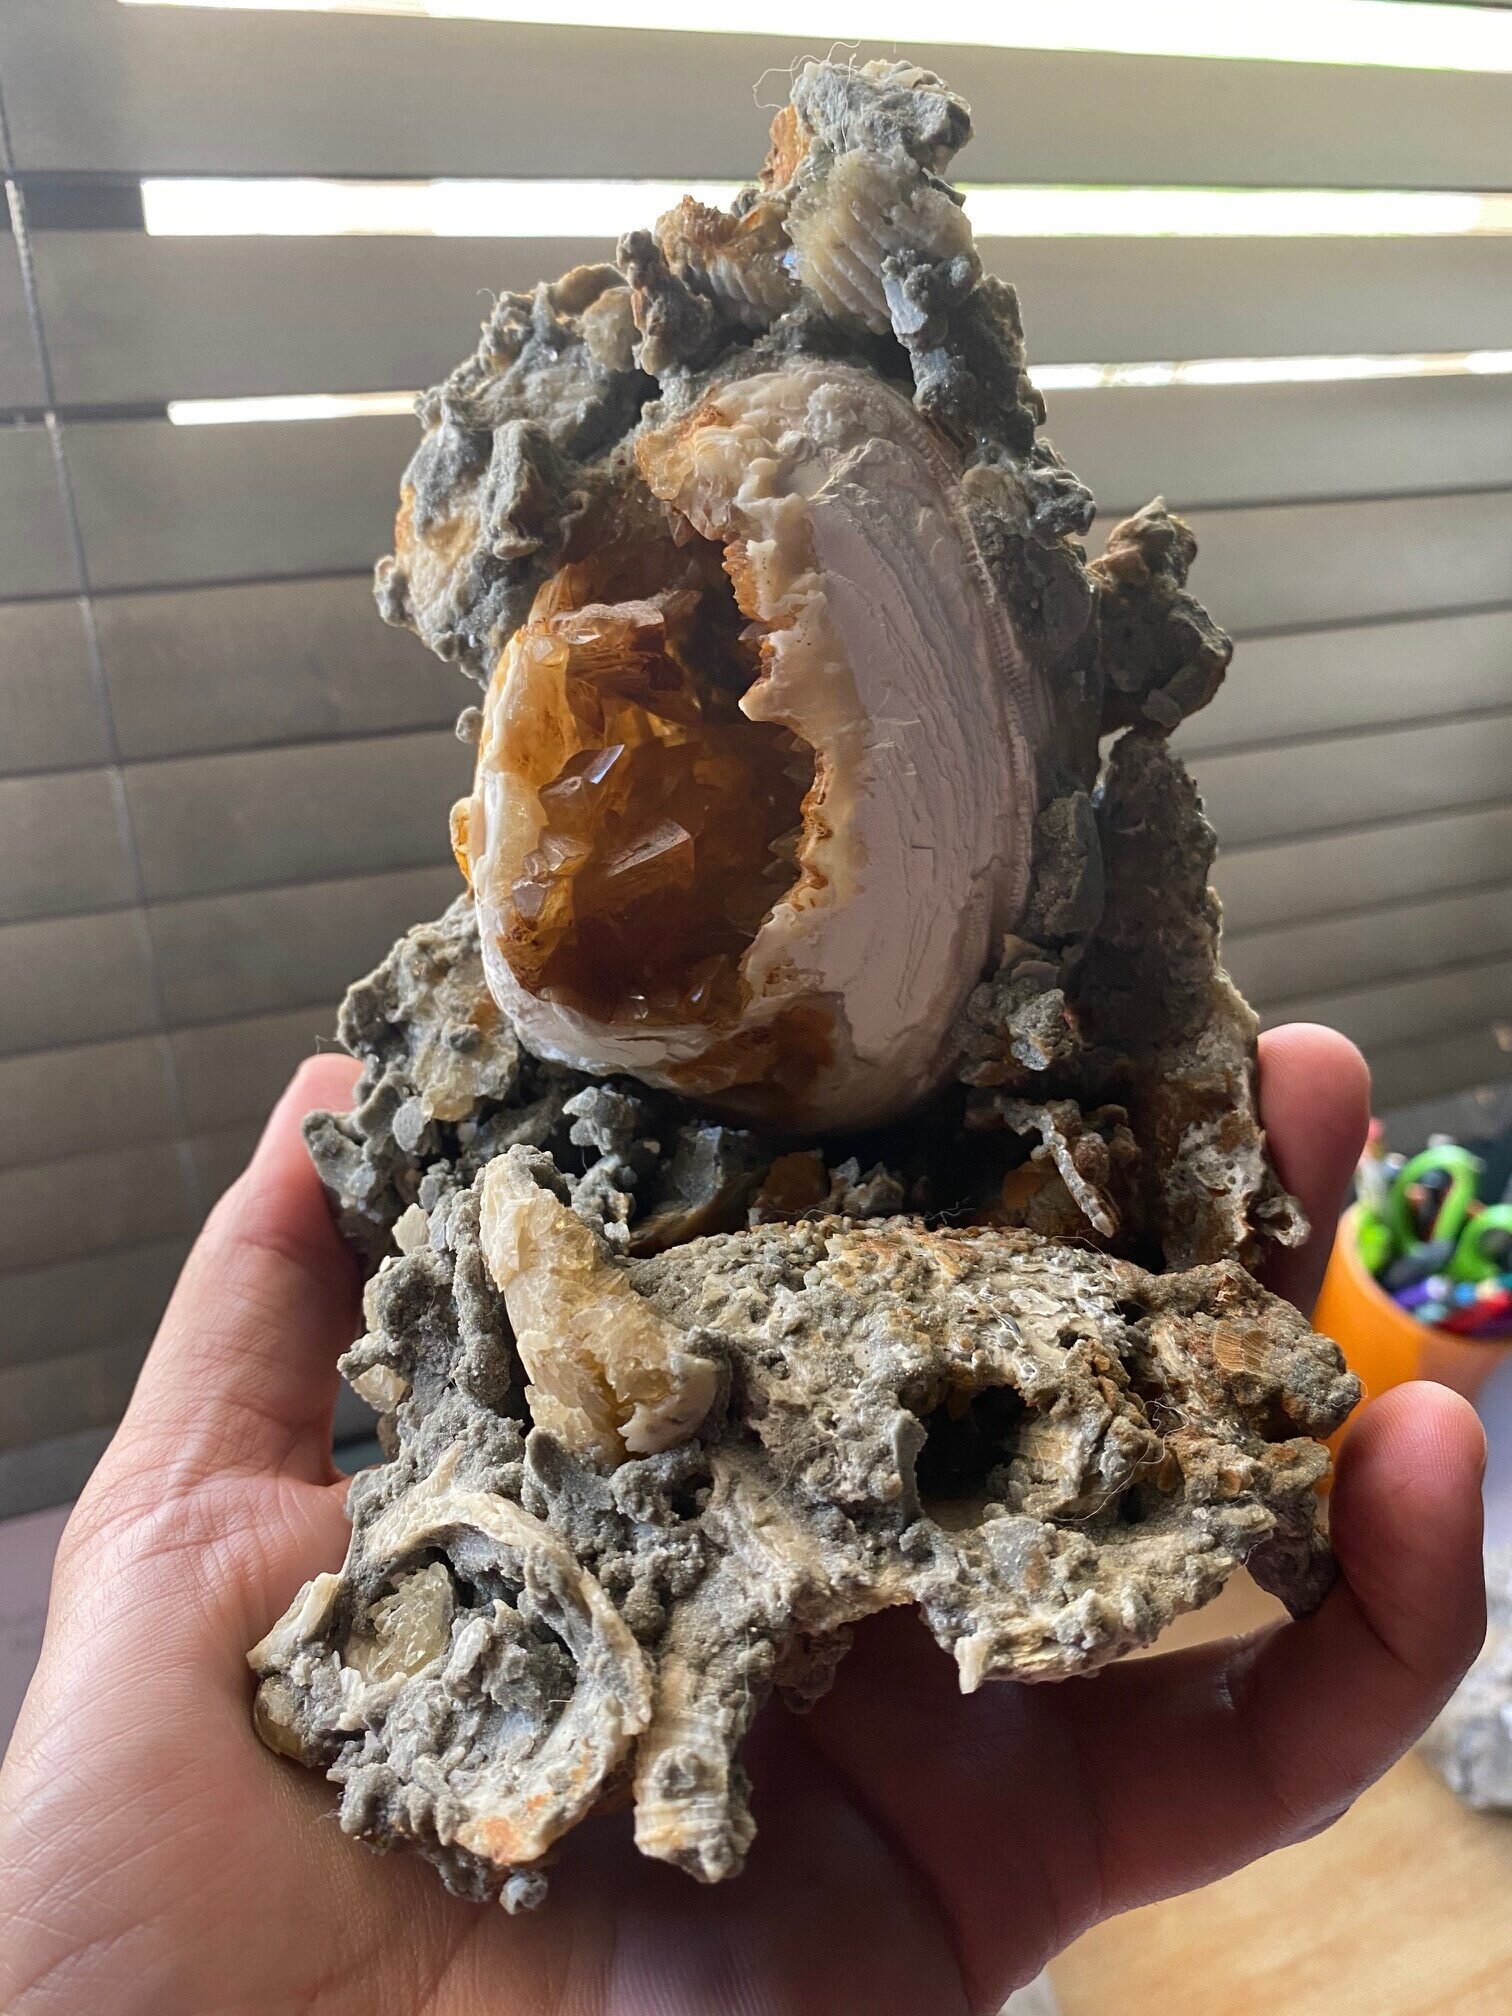 Picked up this complete Ruck’s Pit Calcite in Clam